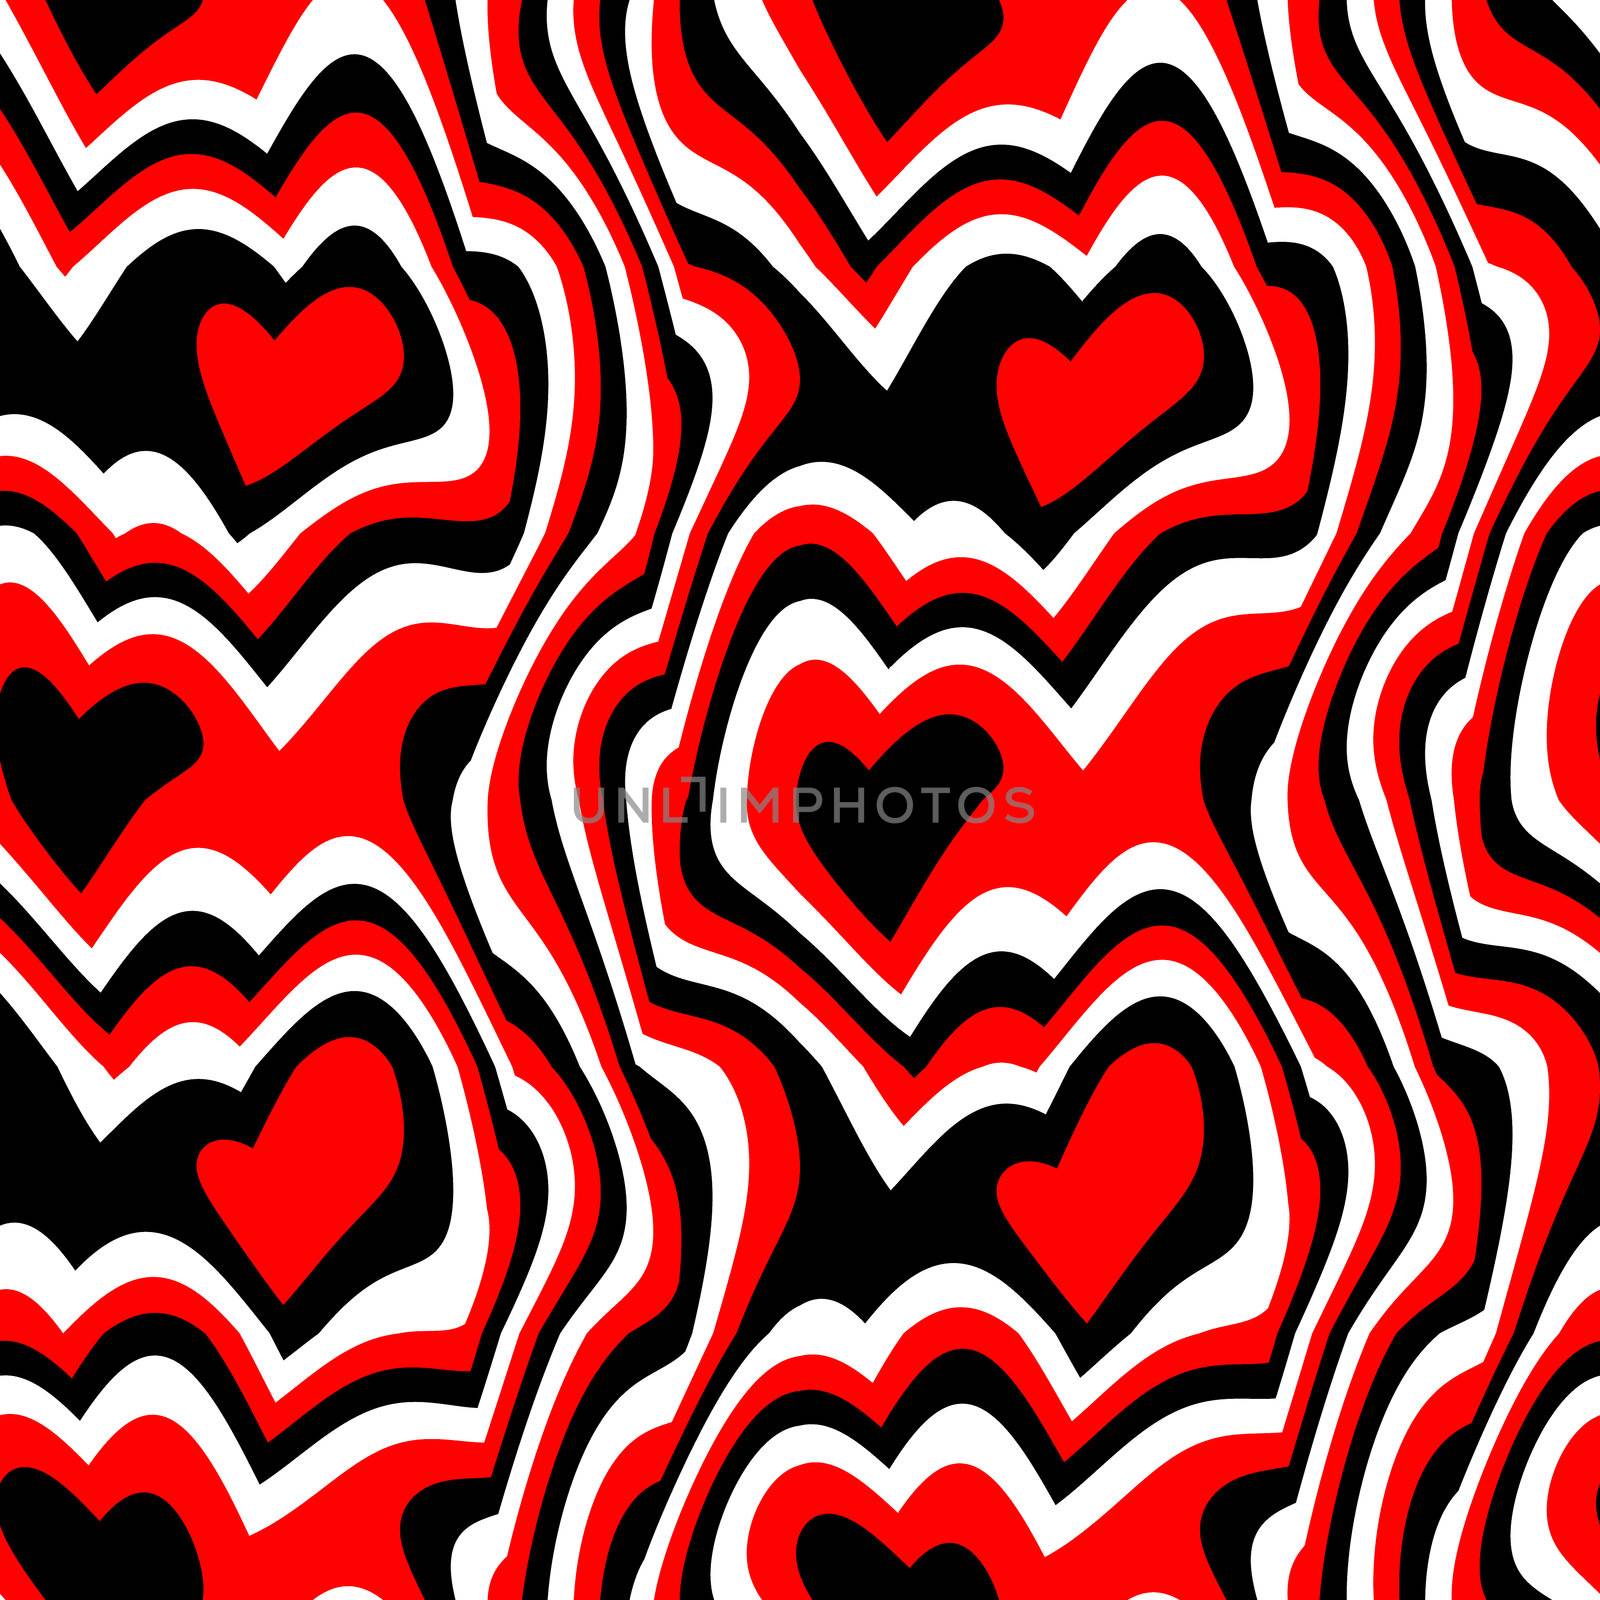 red black hearts background, will tile seamlessly as a pattern